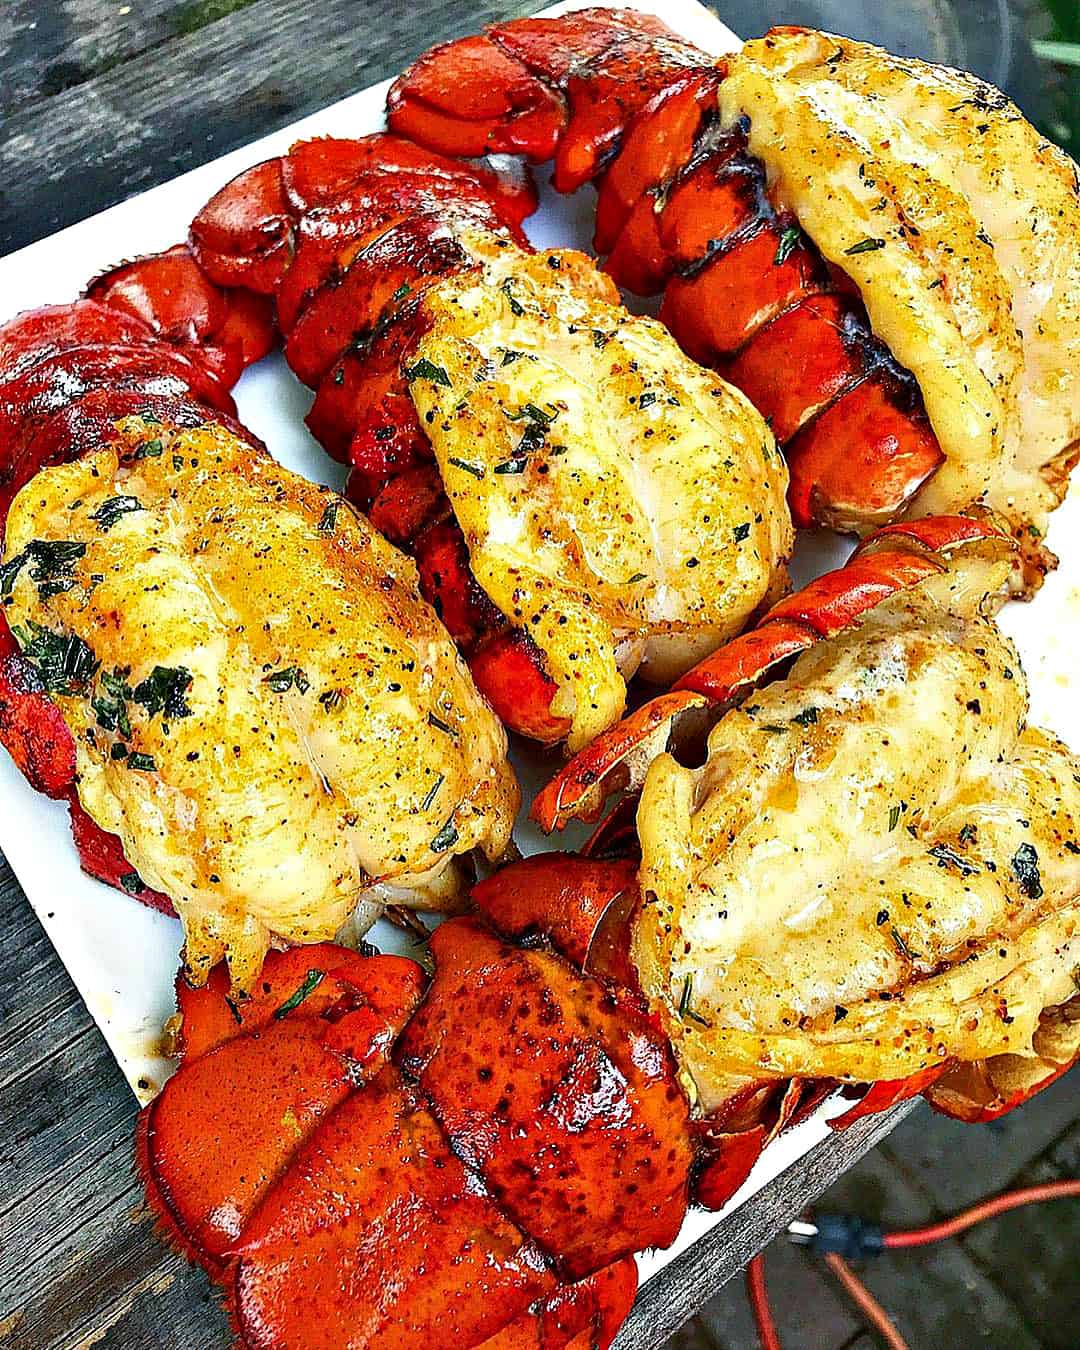 Grilled Lobster Tail for Father's Day